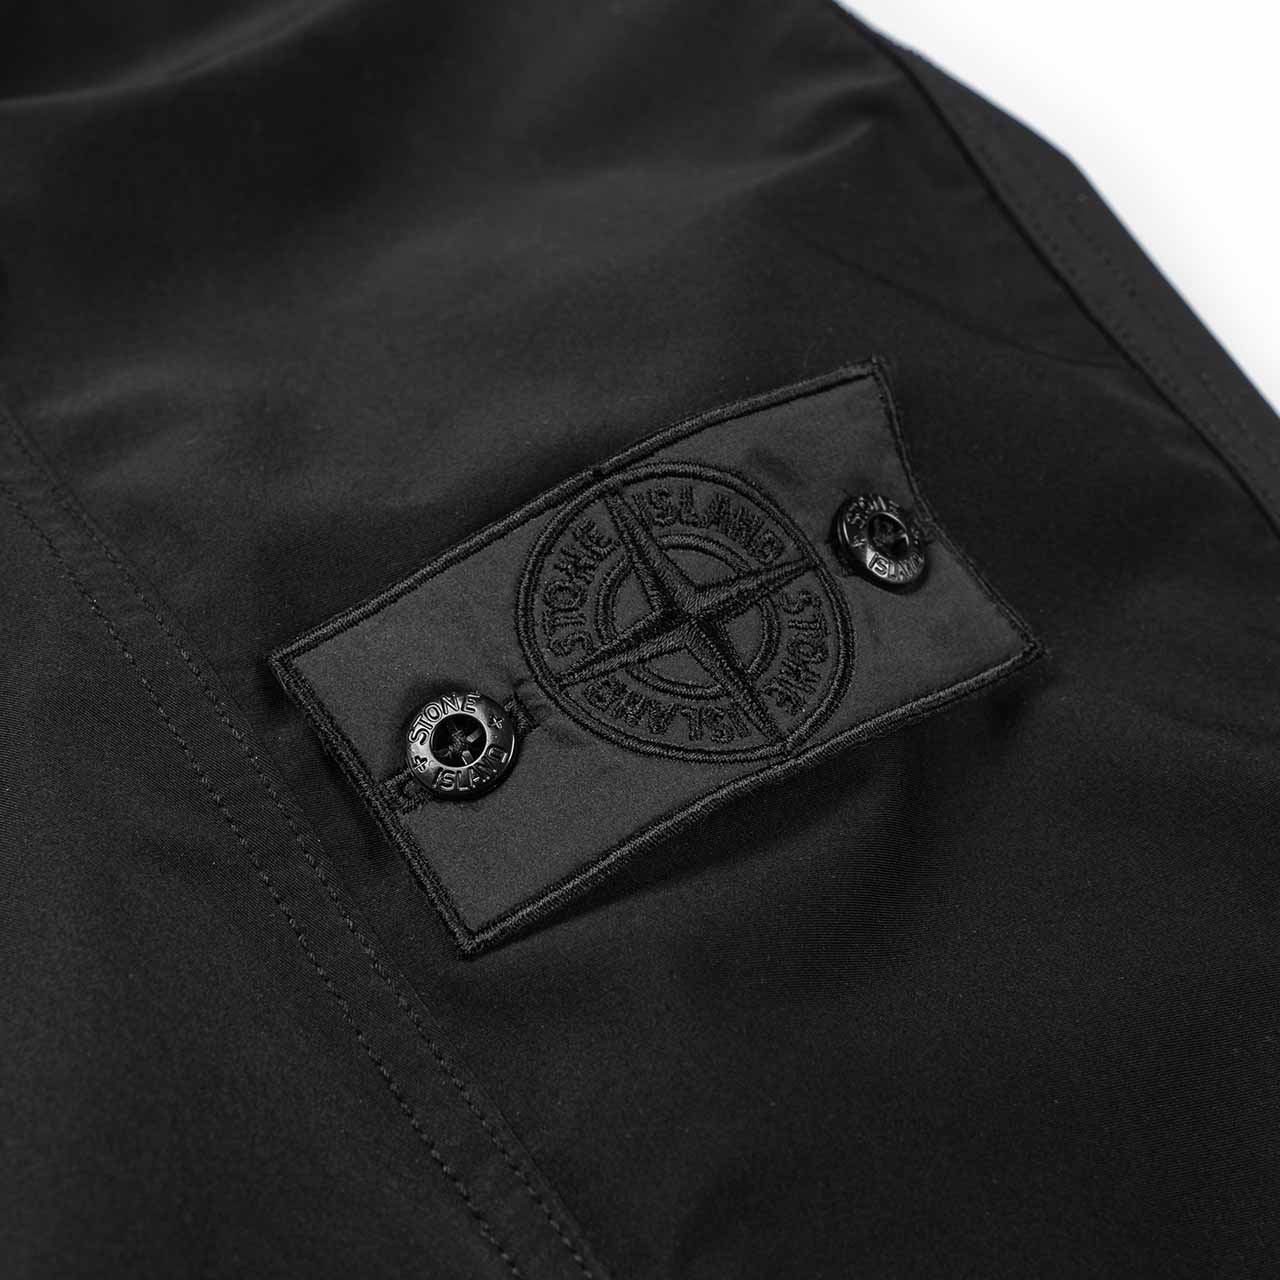 stone island shadow project packable anorak (black) - 721940504.v0029 - a.plus - Image - 7